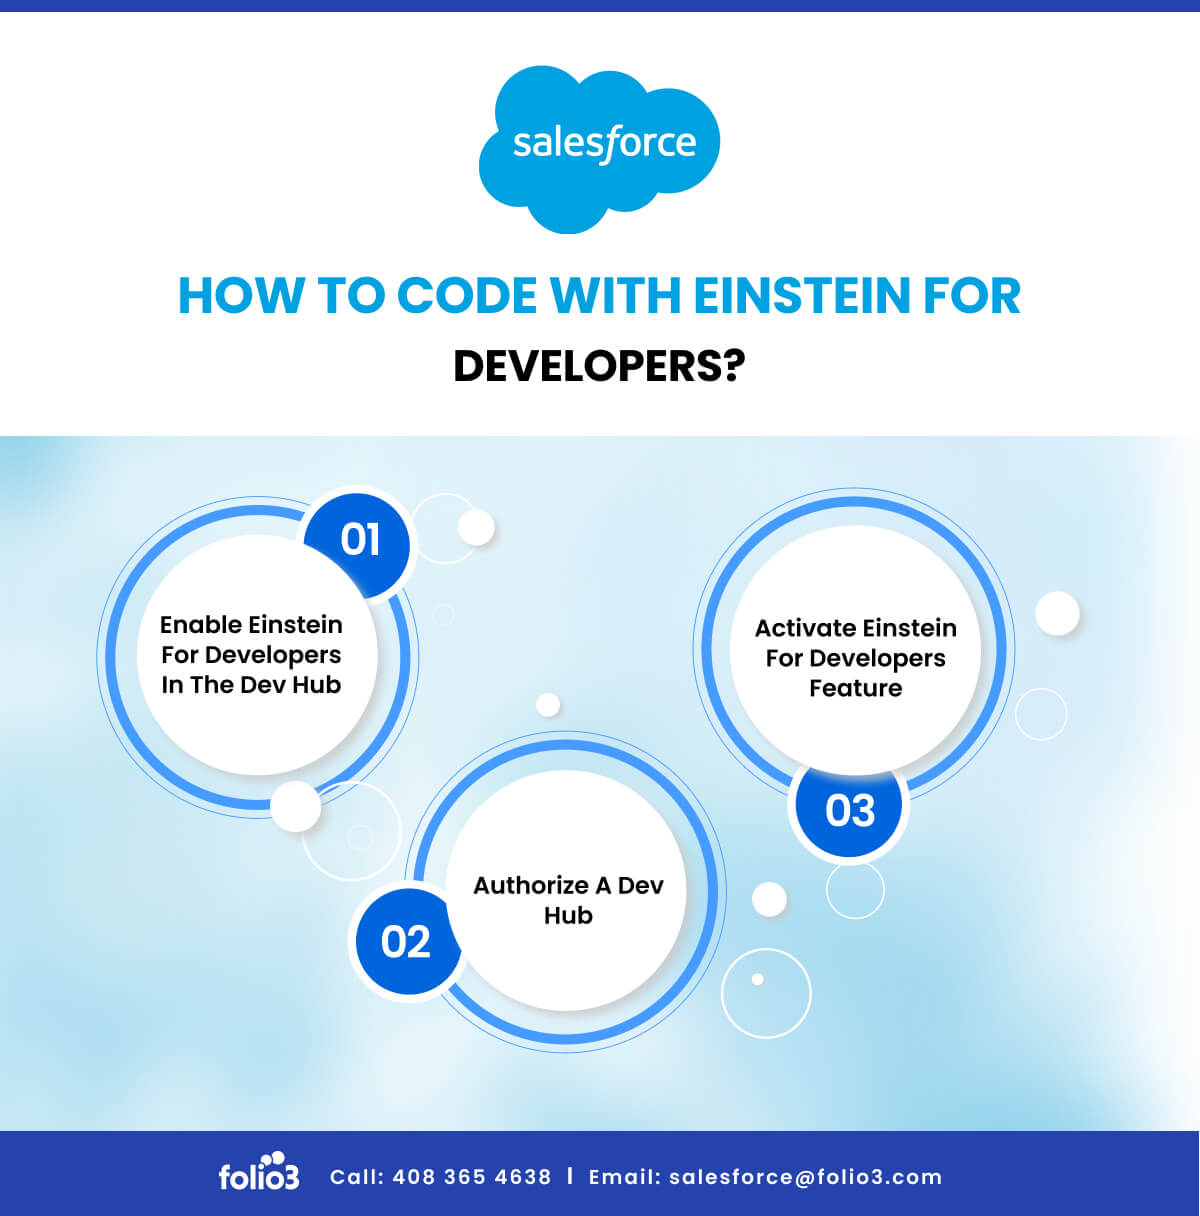 How to Code with Einstein for Developers